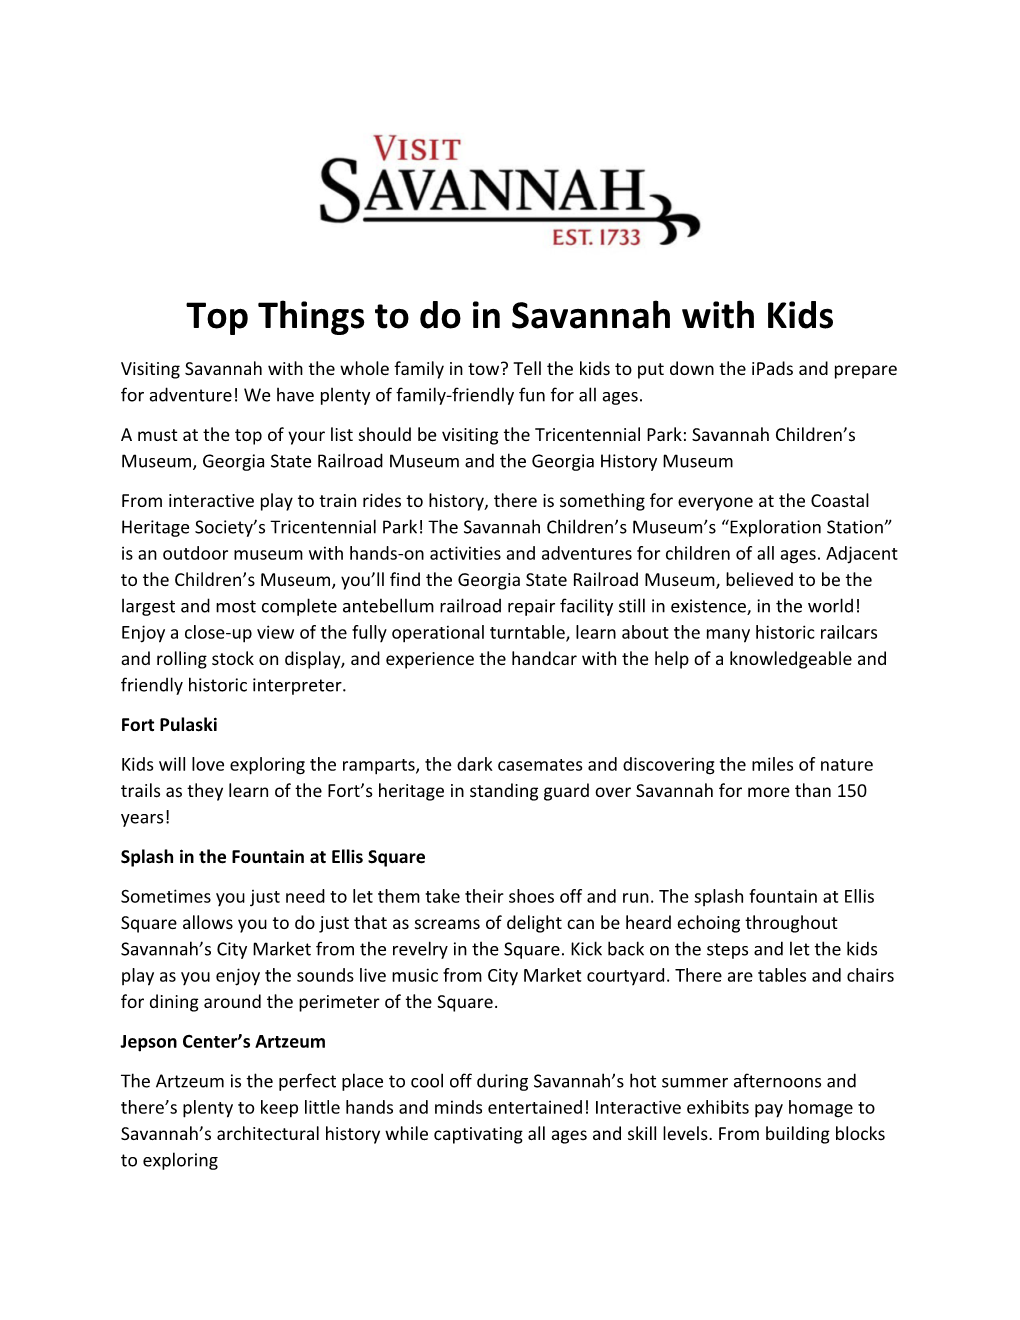 Top Things to Do in Savannah with Kids